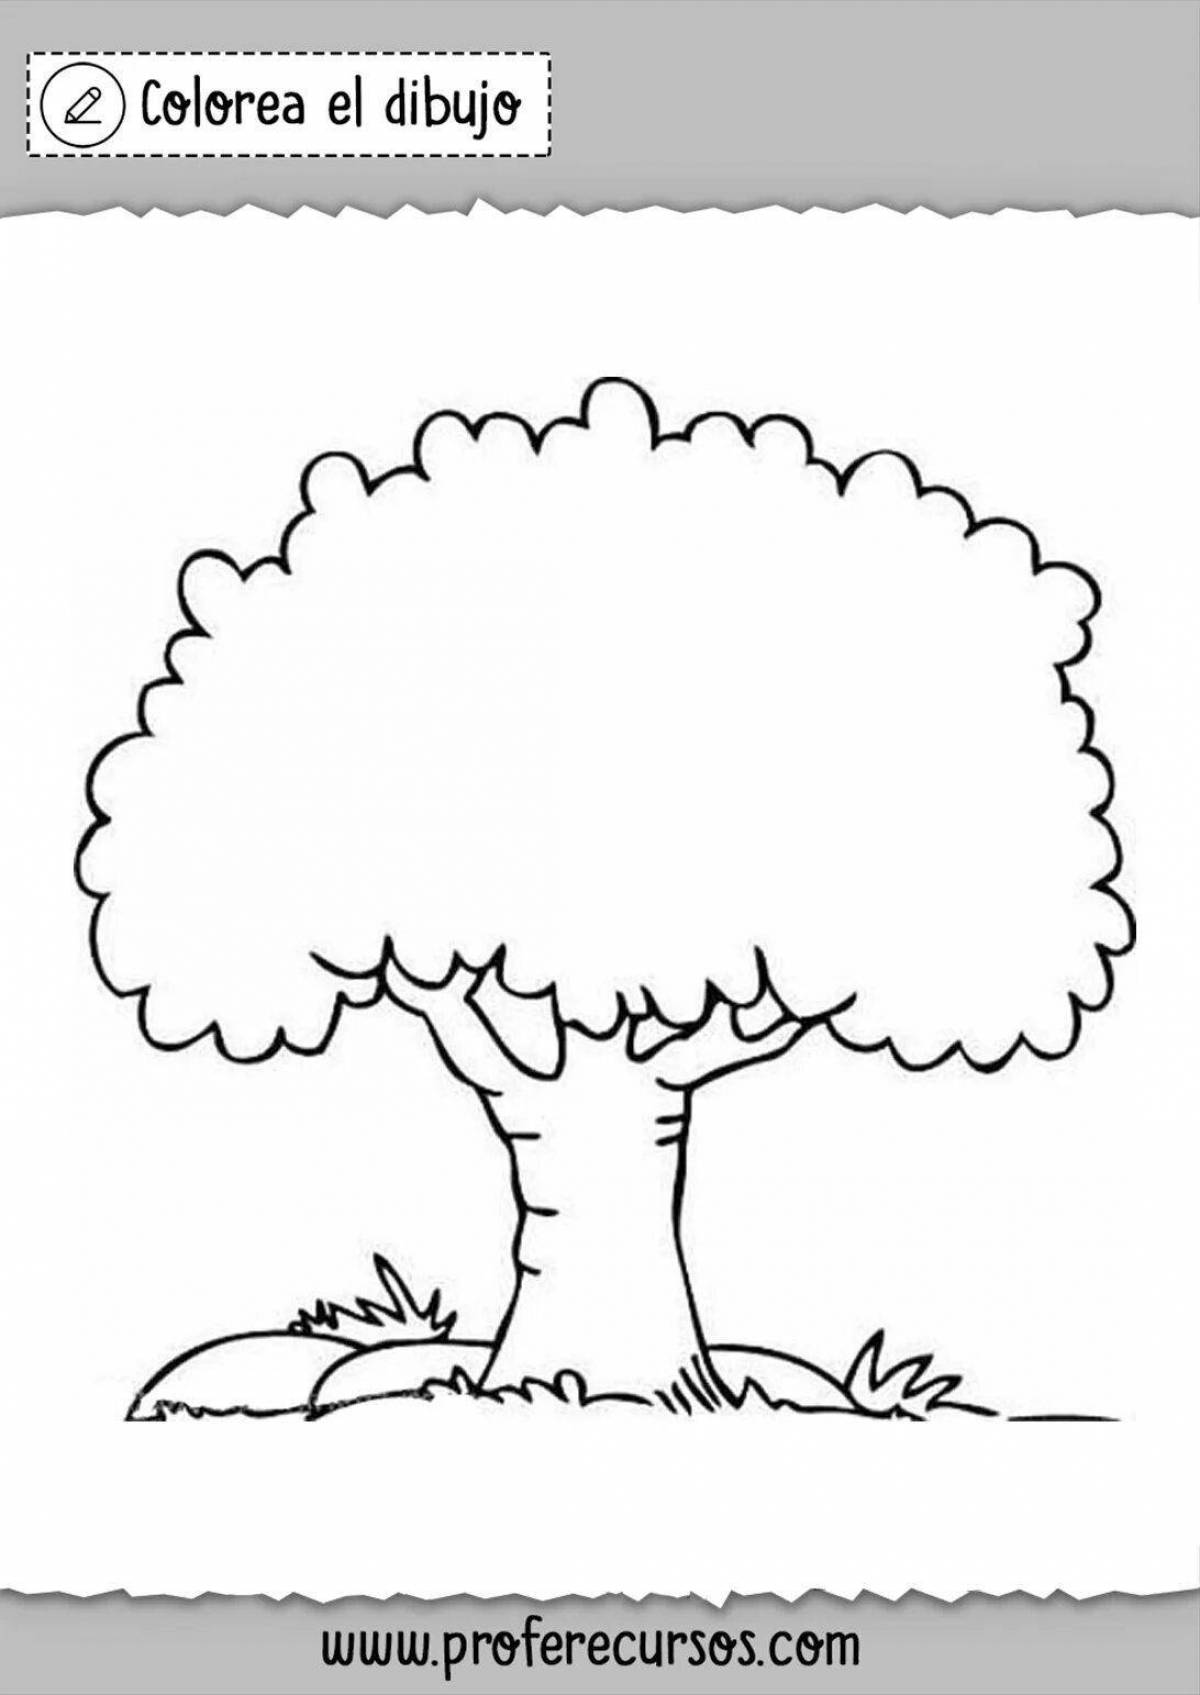 Amazing tree coloring book for 5-6 year olds